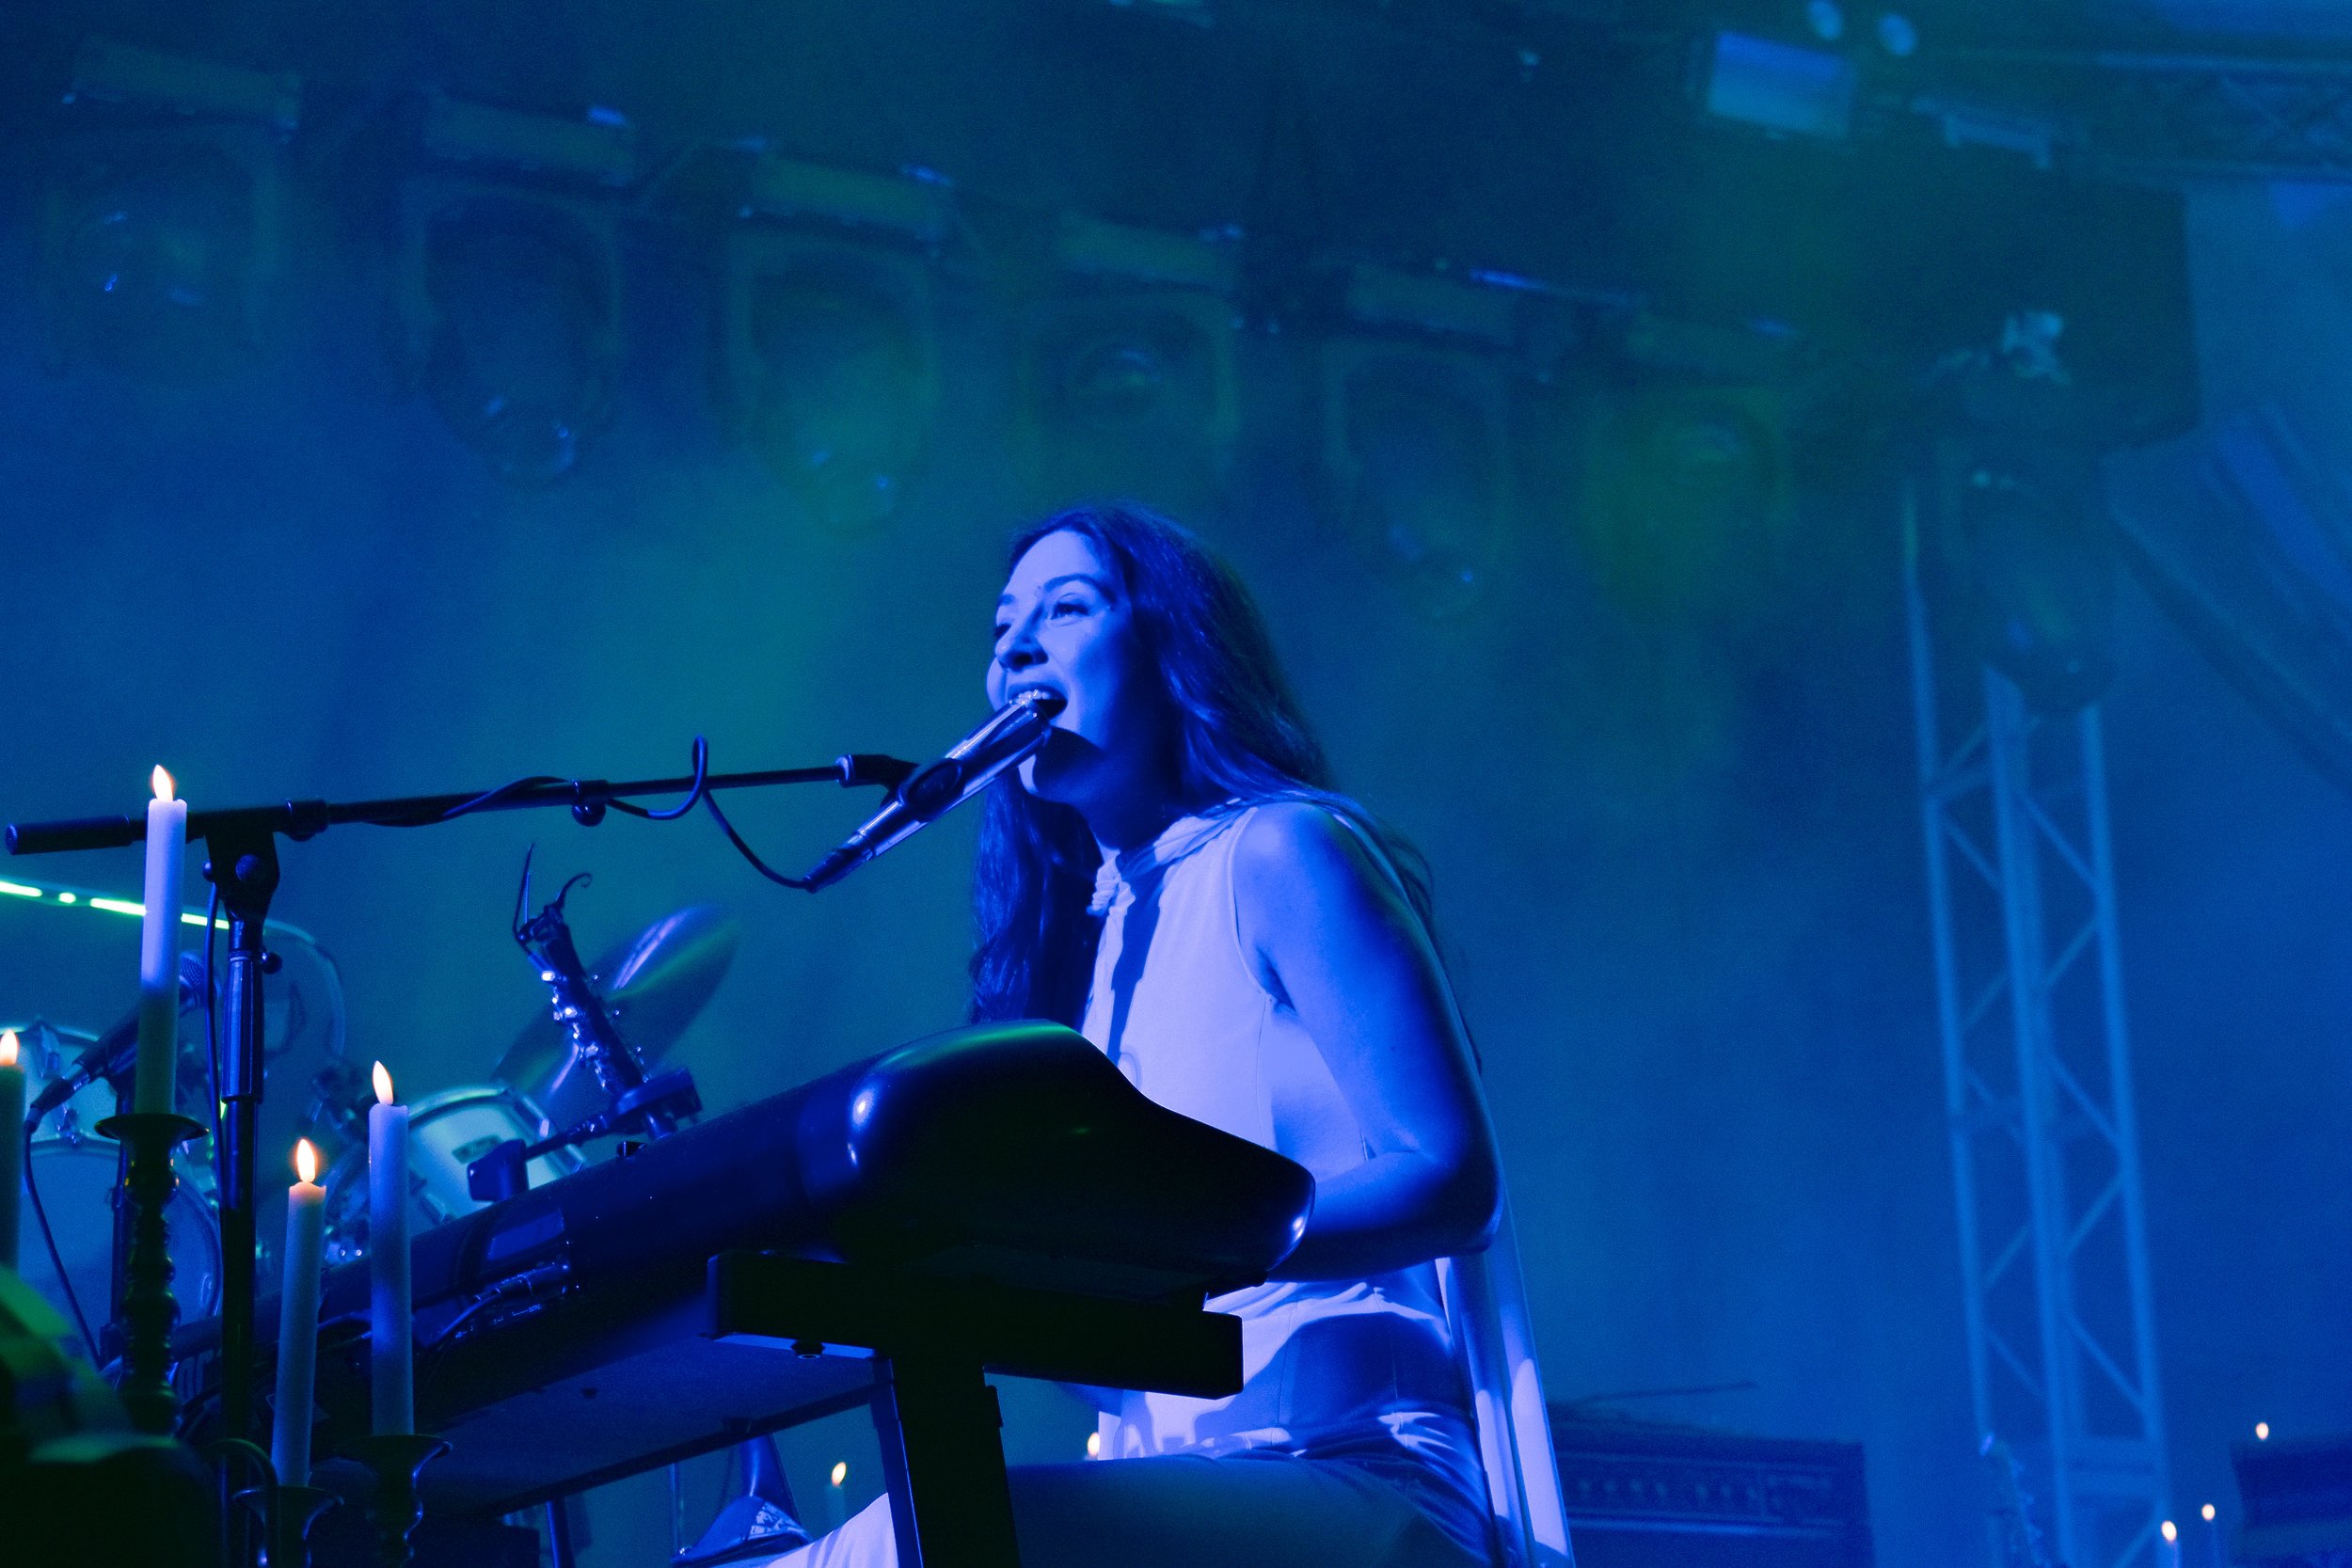  Weyes Blood moves to the piano to perform “Everyday.” Before she starts, she suggests the crowd mosh to the melodramatic piece. 